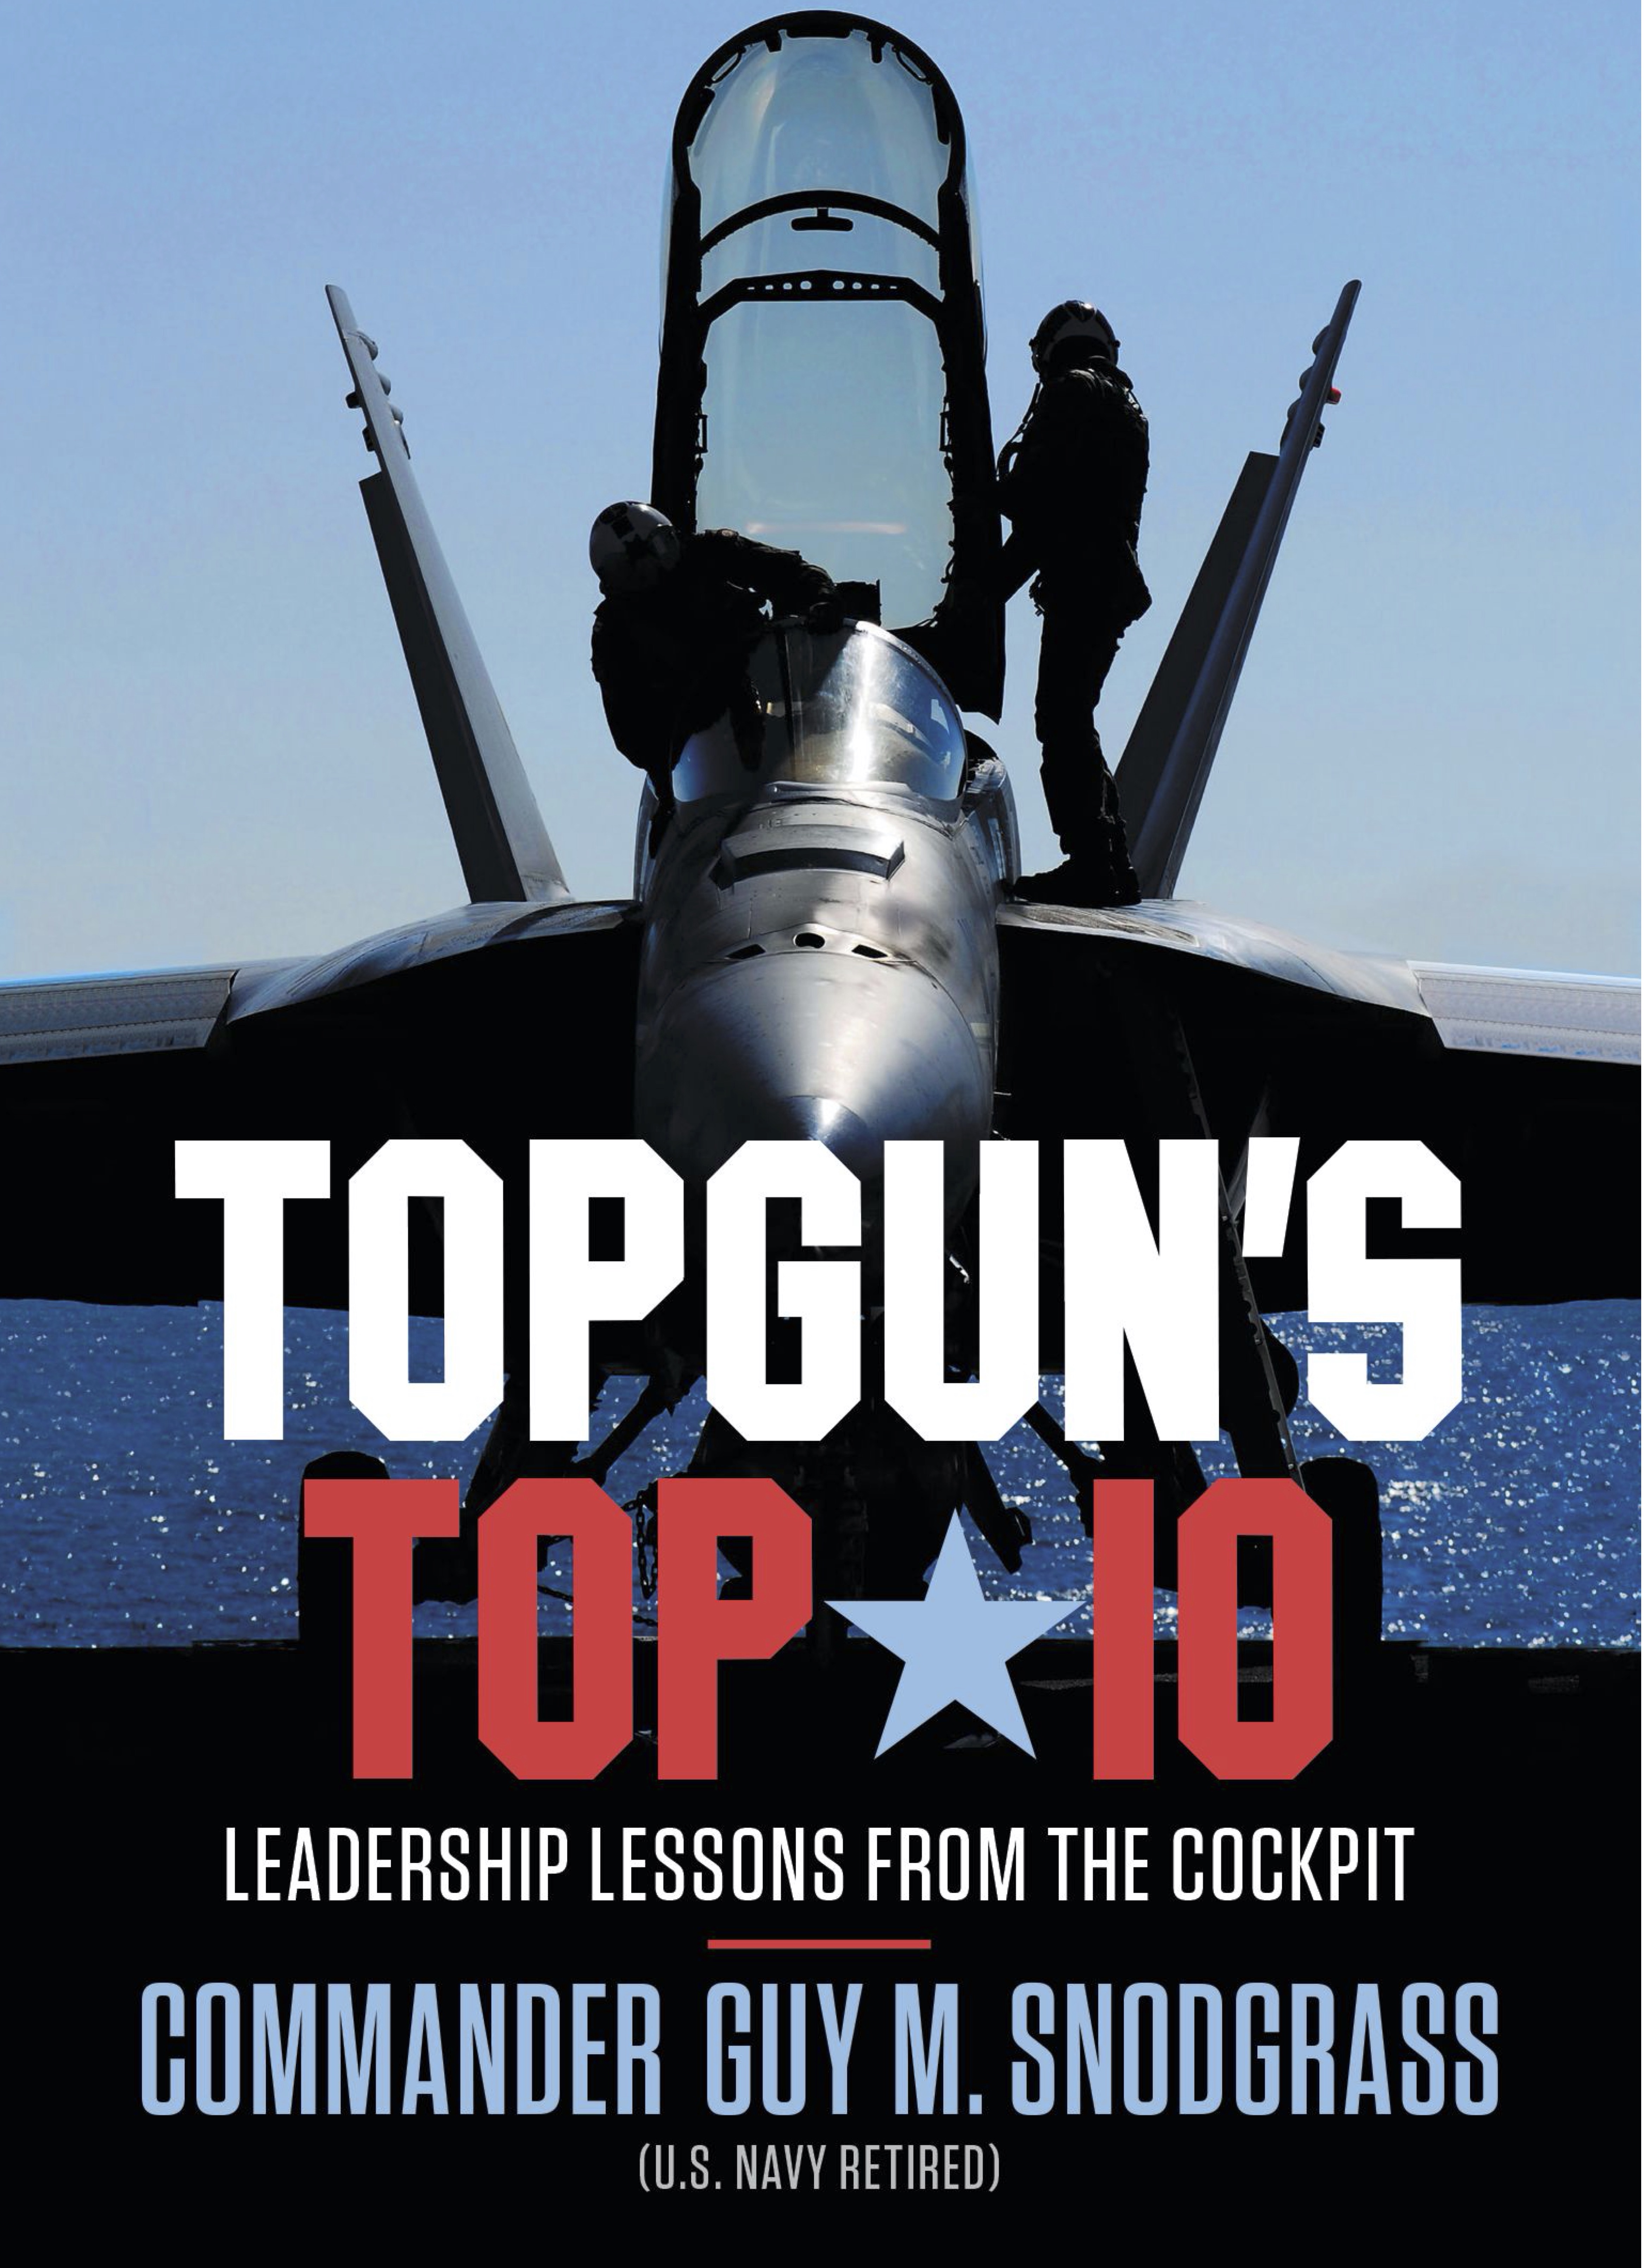 Topgun’s Top 10: Leadership Lessons from the Cockpit by Commander Guy M. Snodgrass